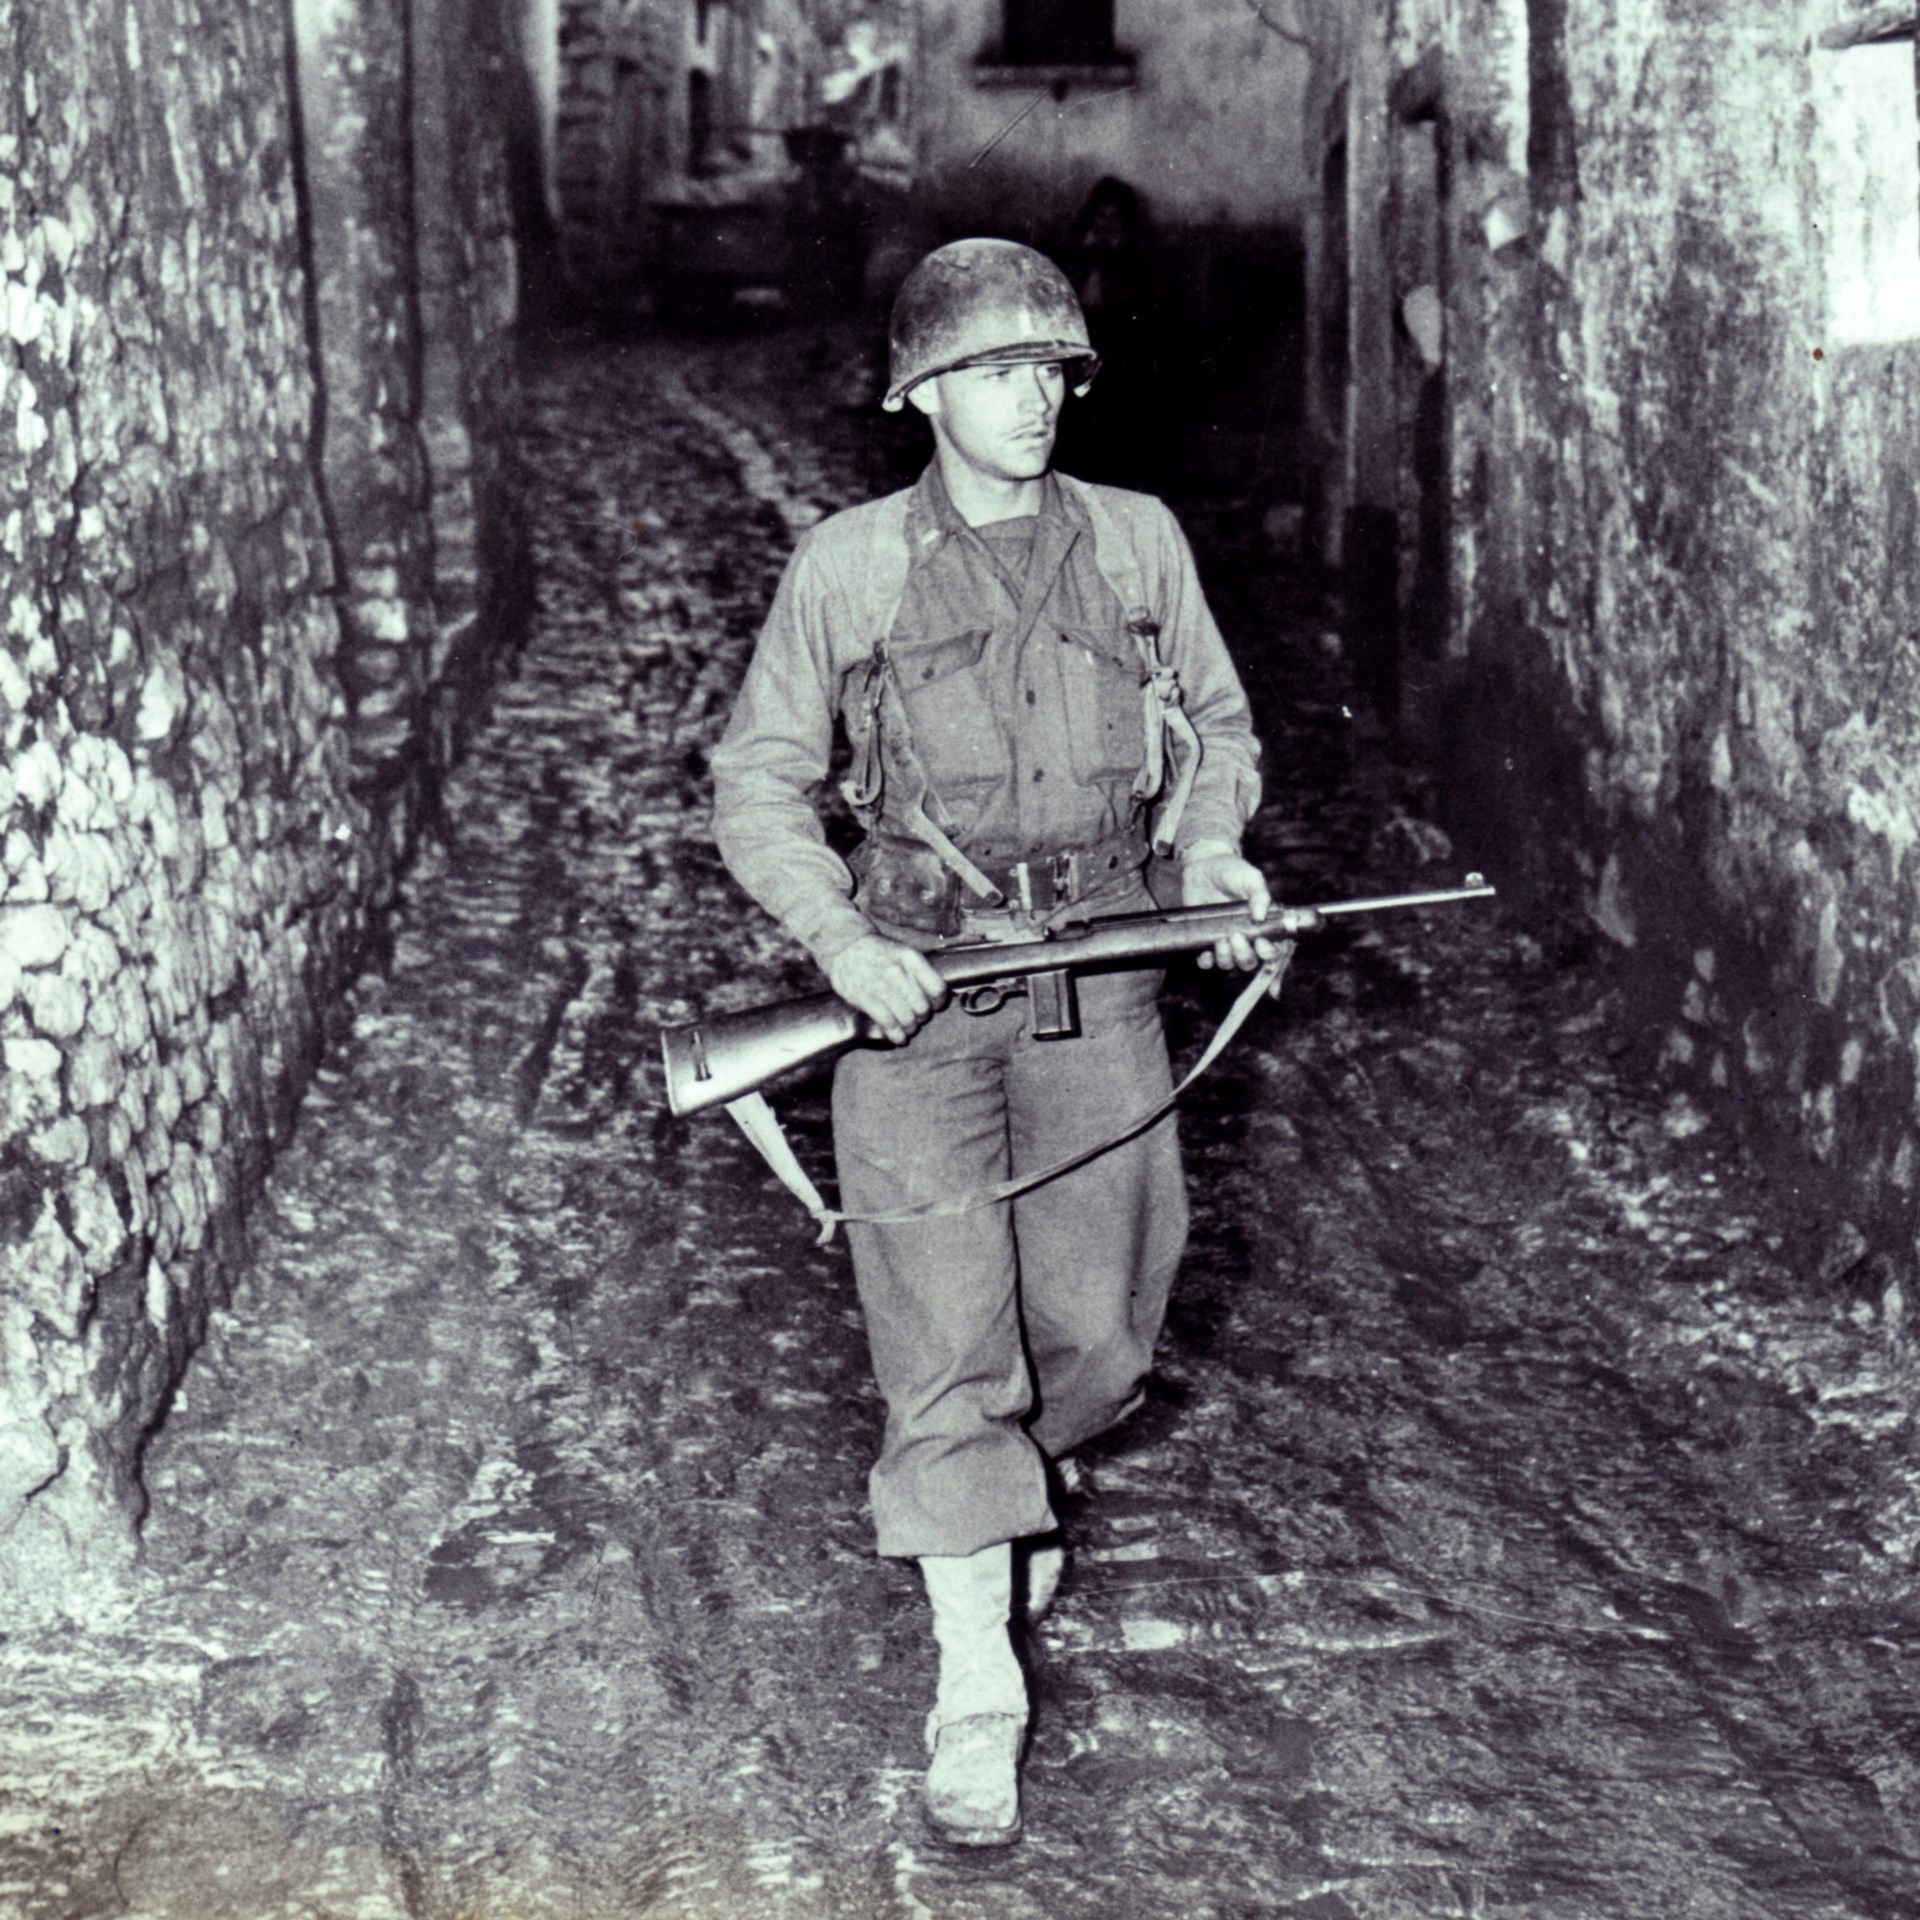 U.S. soldier WWII Italy in alley with m1 carbine